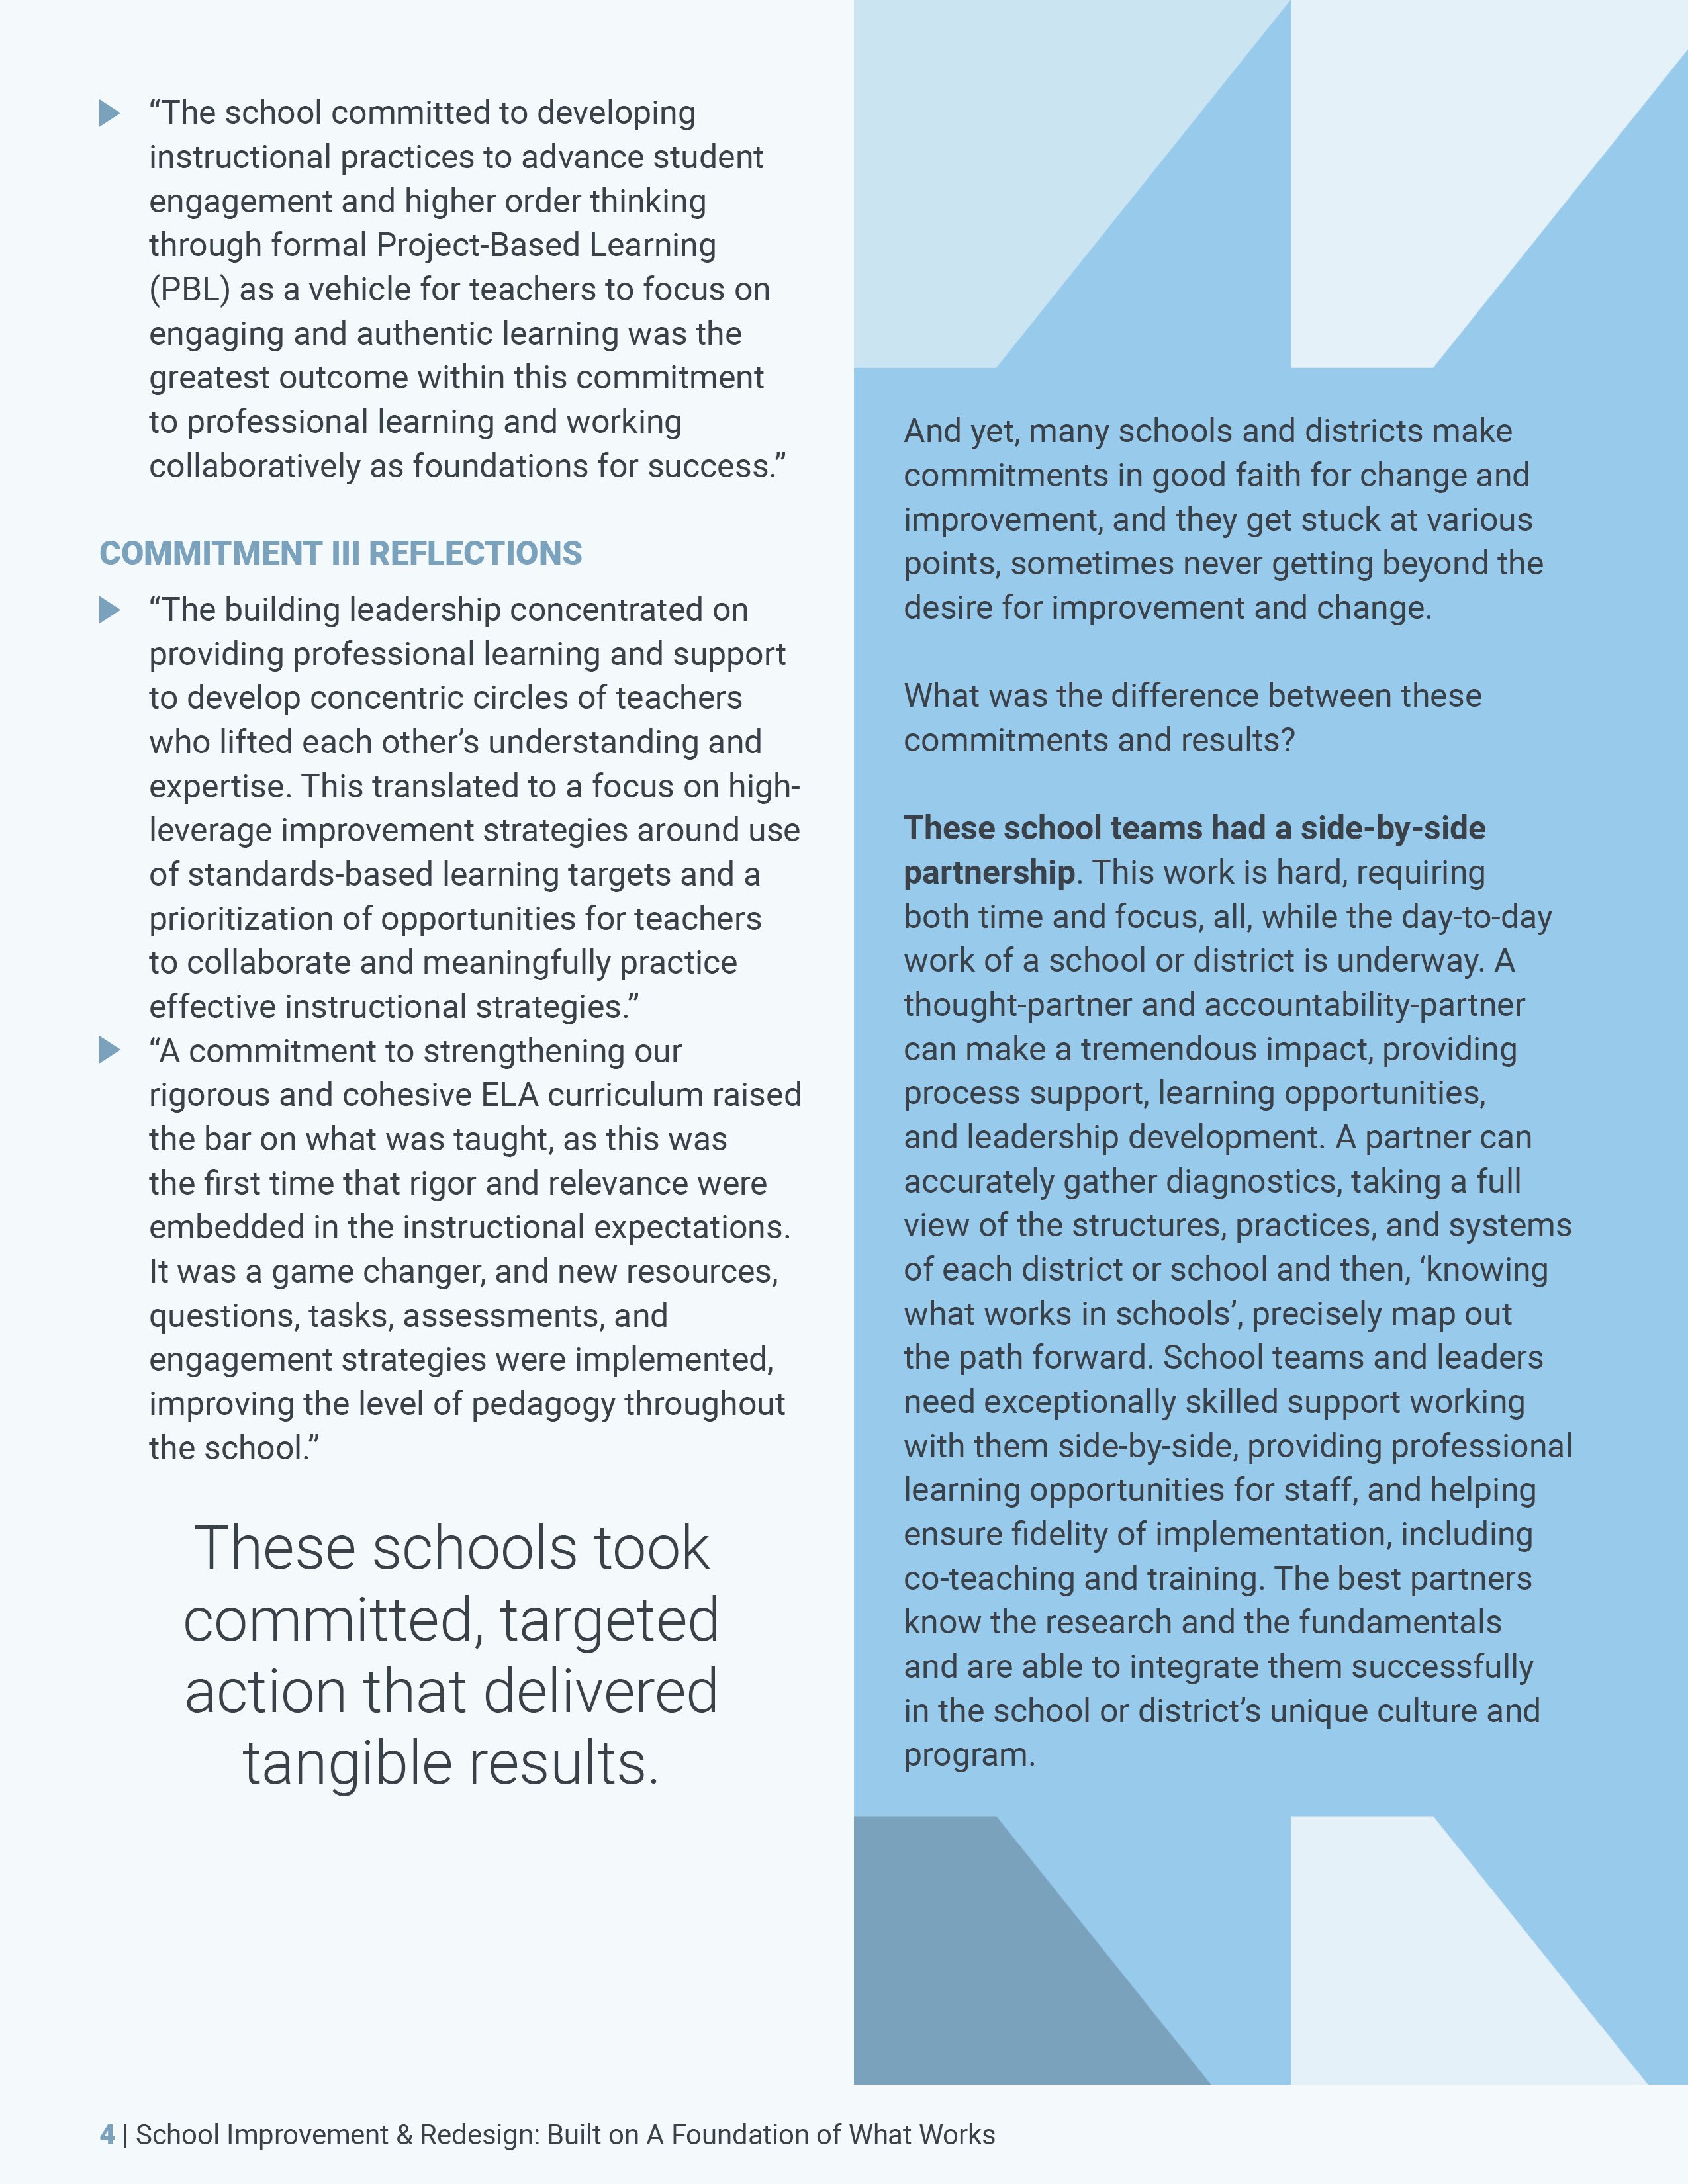 School Improvement and Redesign page 4